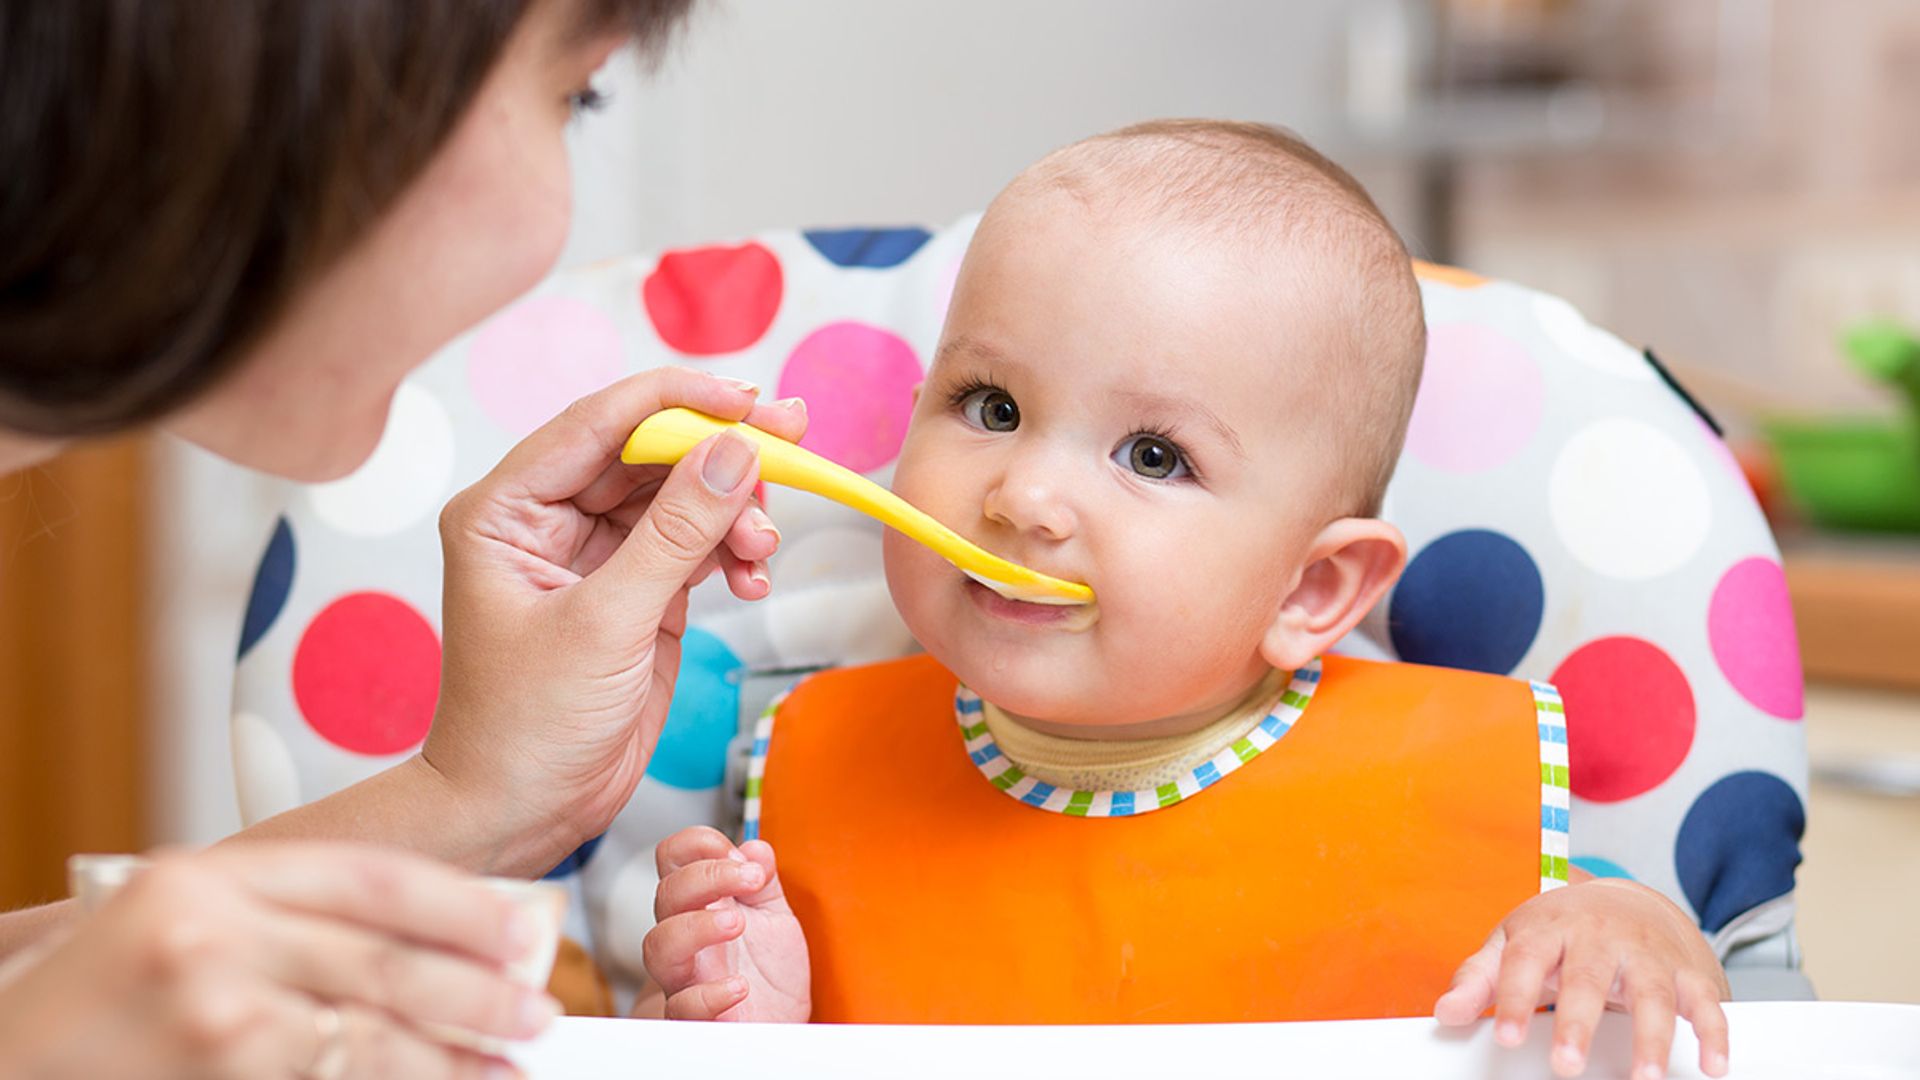 How to wean your baby: when to start, foods to offer and common problems